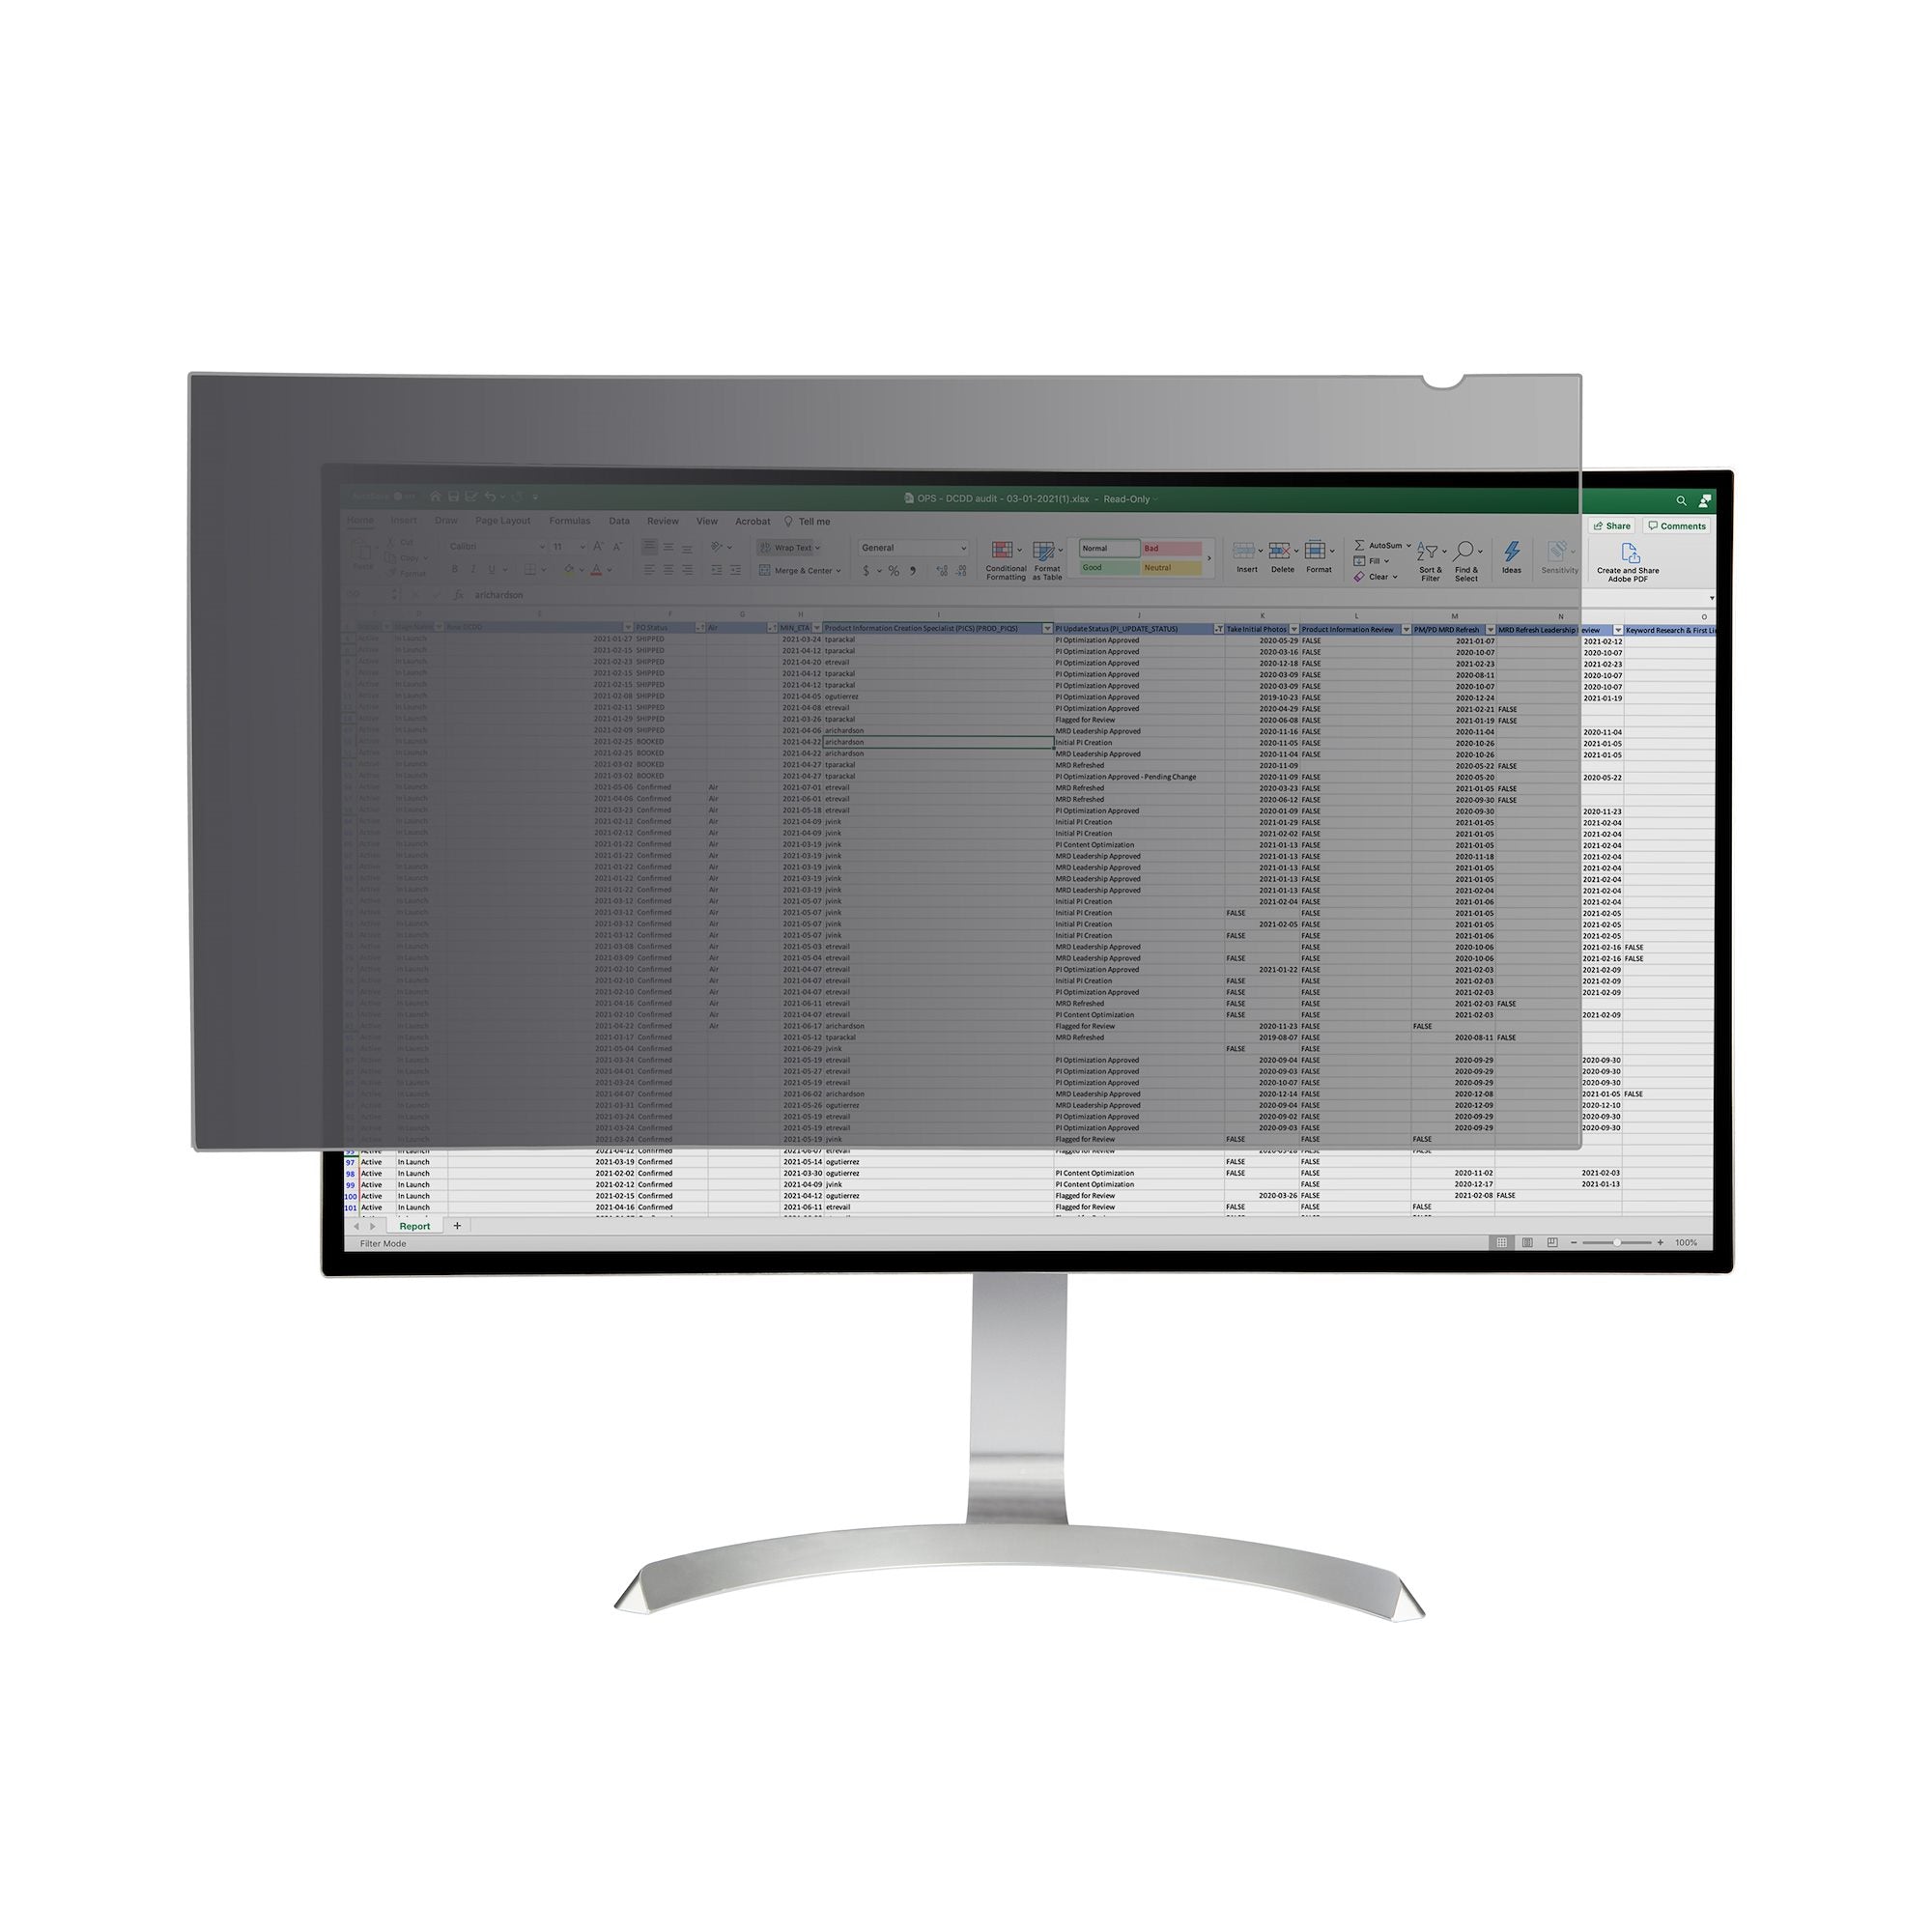 StarTech.com Monitor Privacy Screen for 32 inch PC Display - Computer Screen Security Filter - Blue Light Reducing Screen Protector Film - 16:9 Widescreen - Matte/Glossy - +/-30 Degree